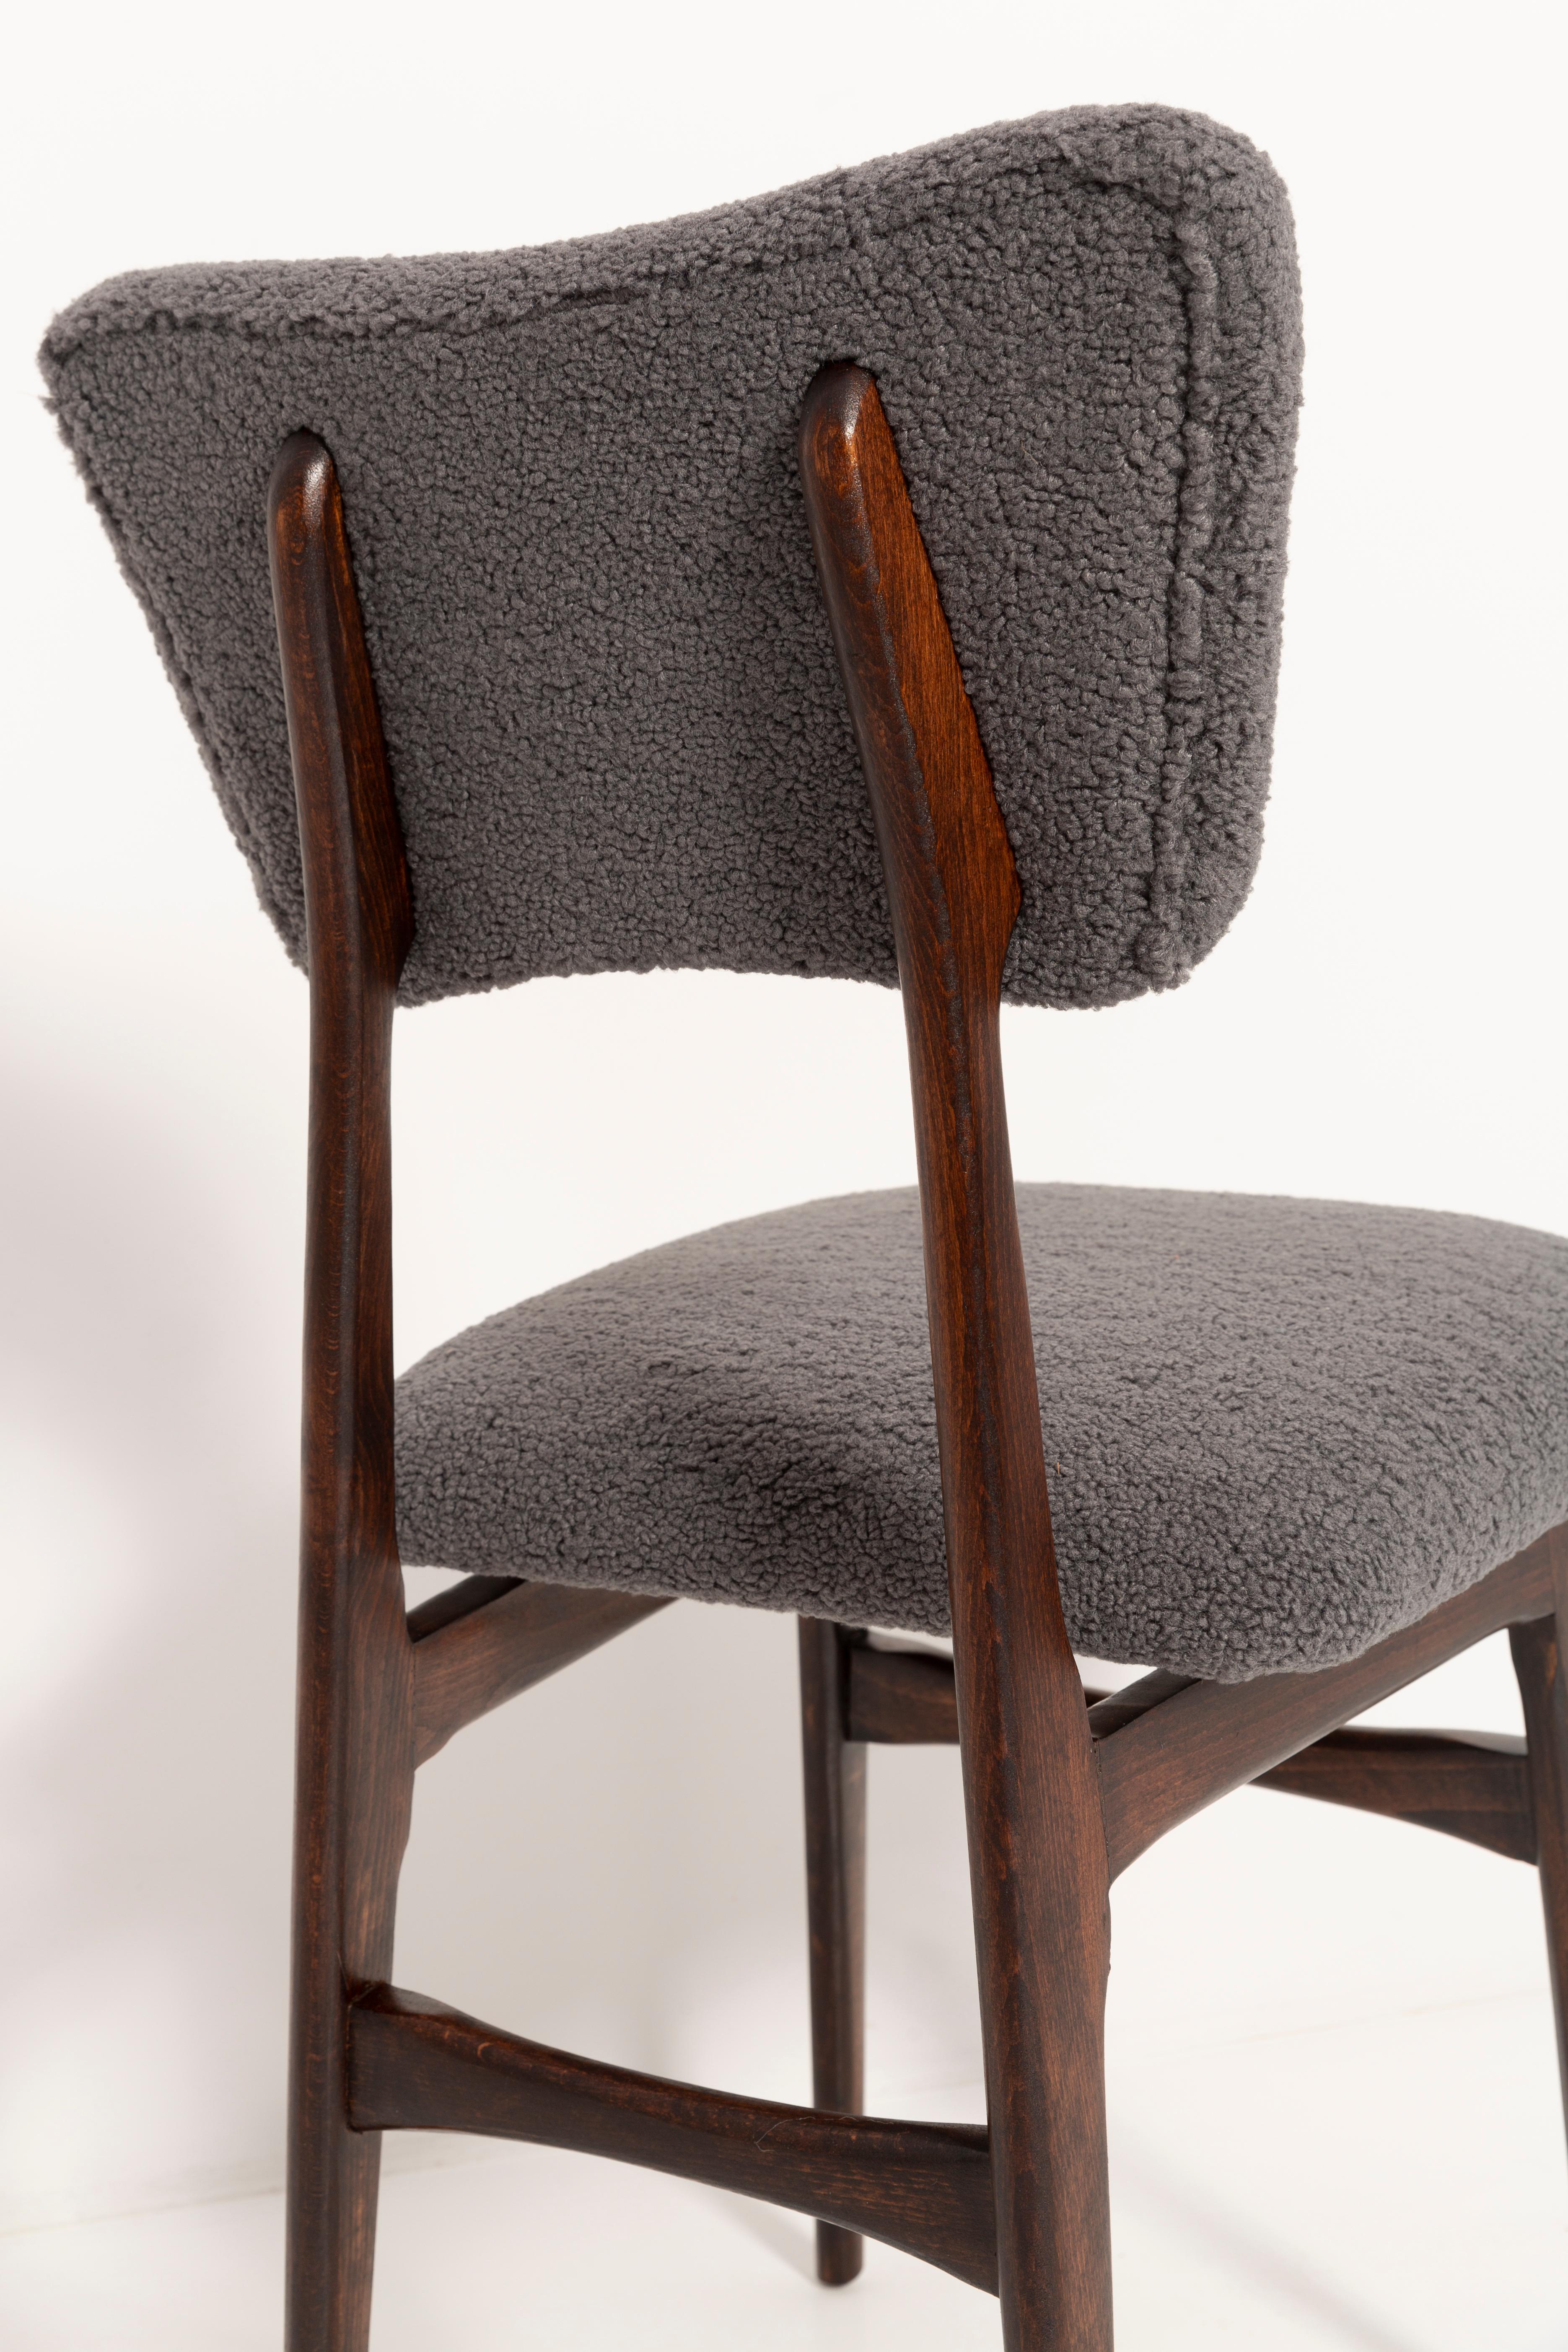 Velvet Set of Two 20th Century Chairs in Dark Boucle, Europe, 1960s For Sale